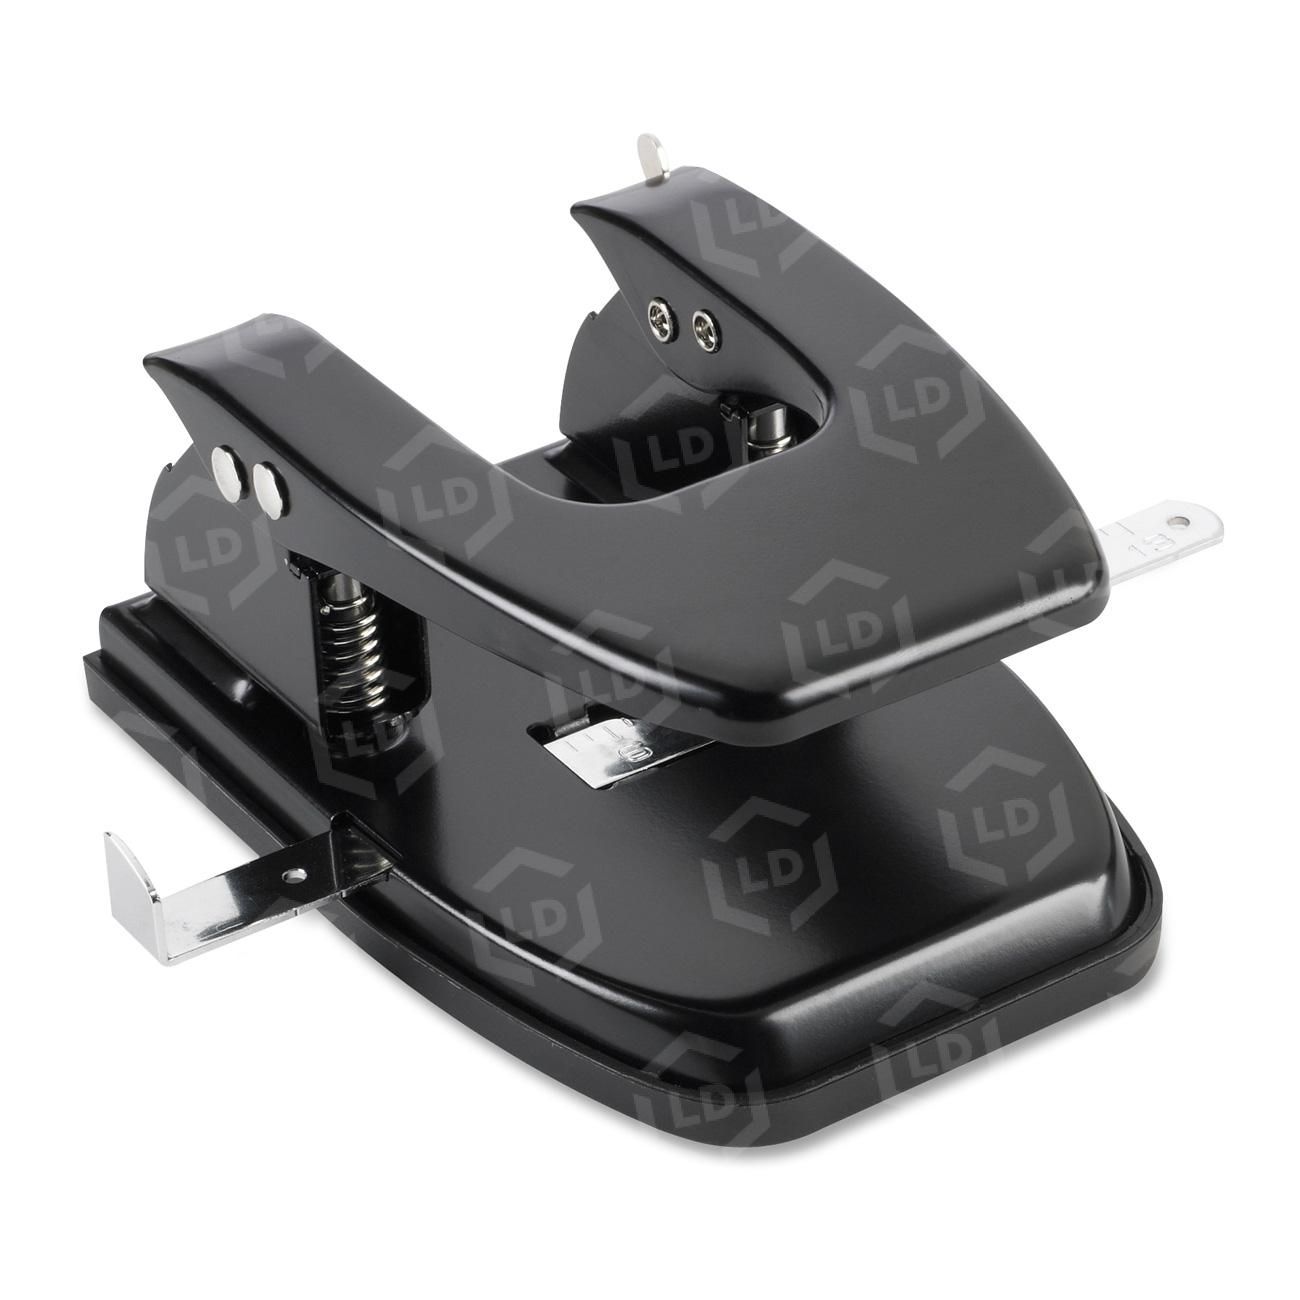 MATMP250 - Master® Heavy-Duty Two Hole Punch